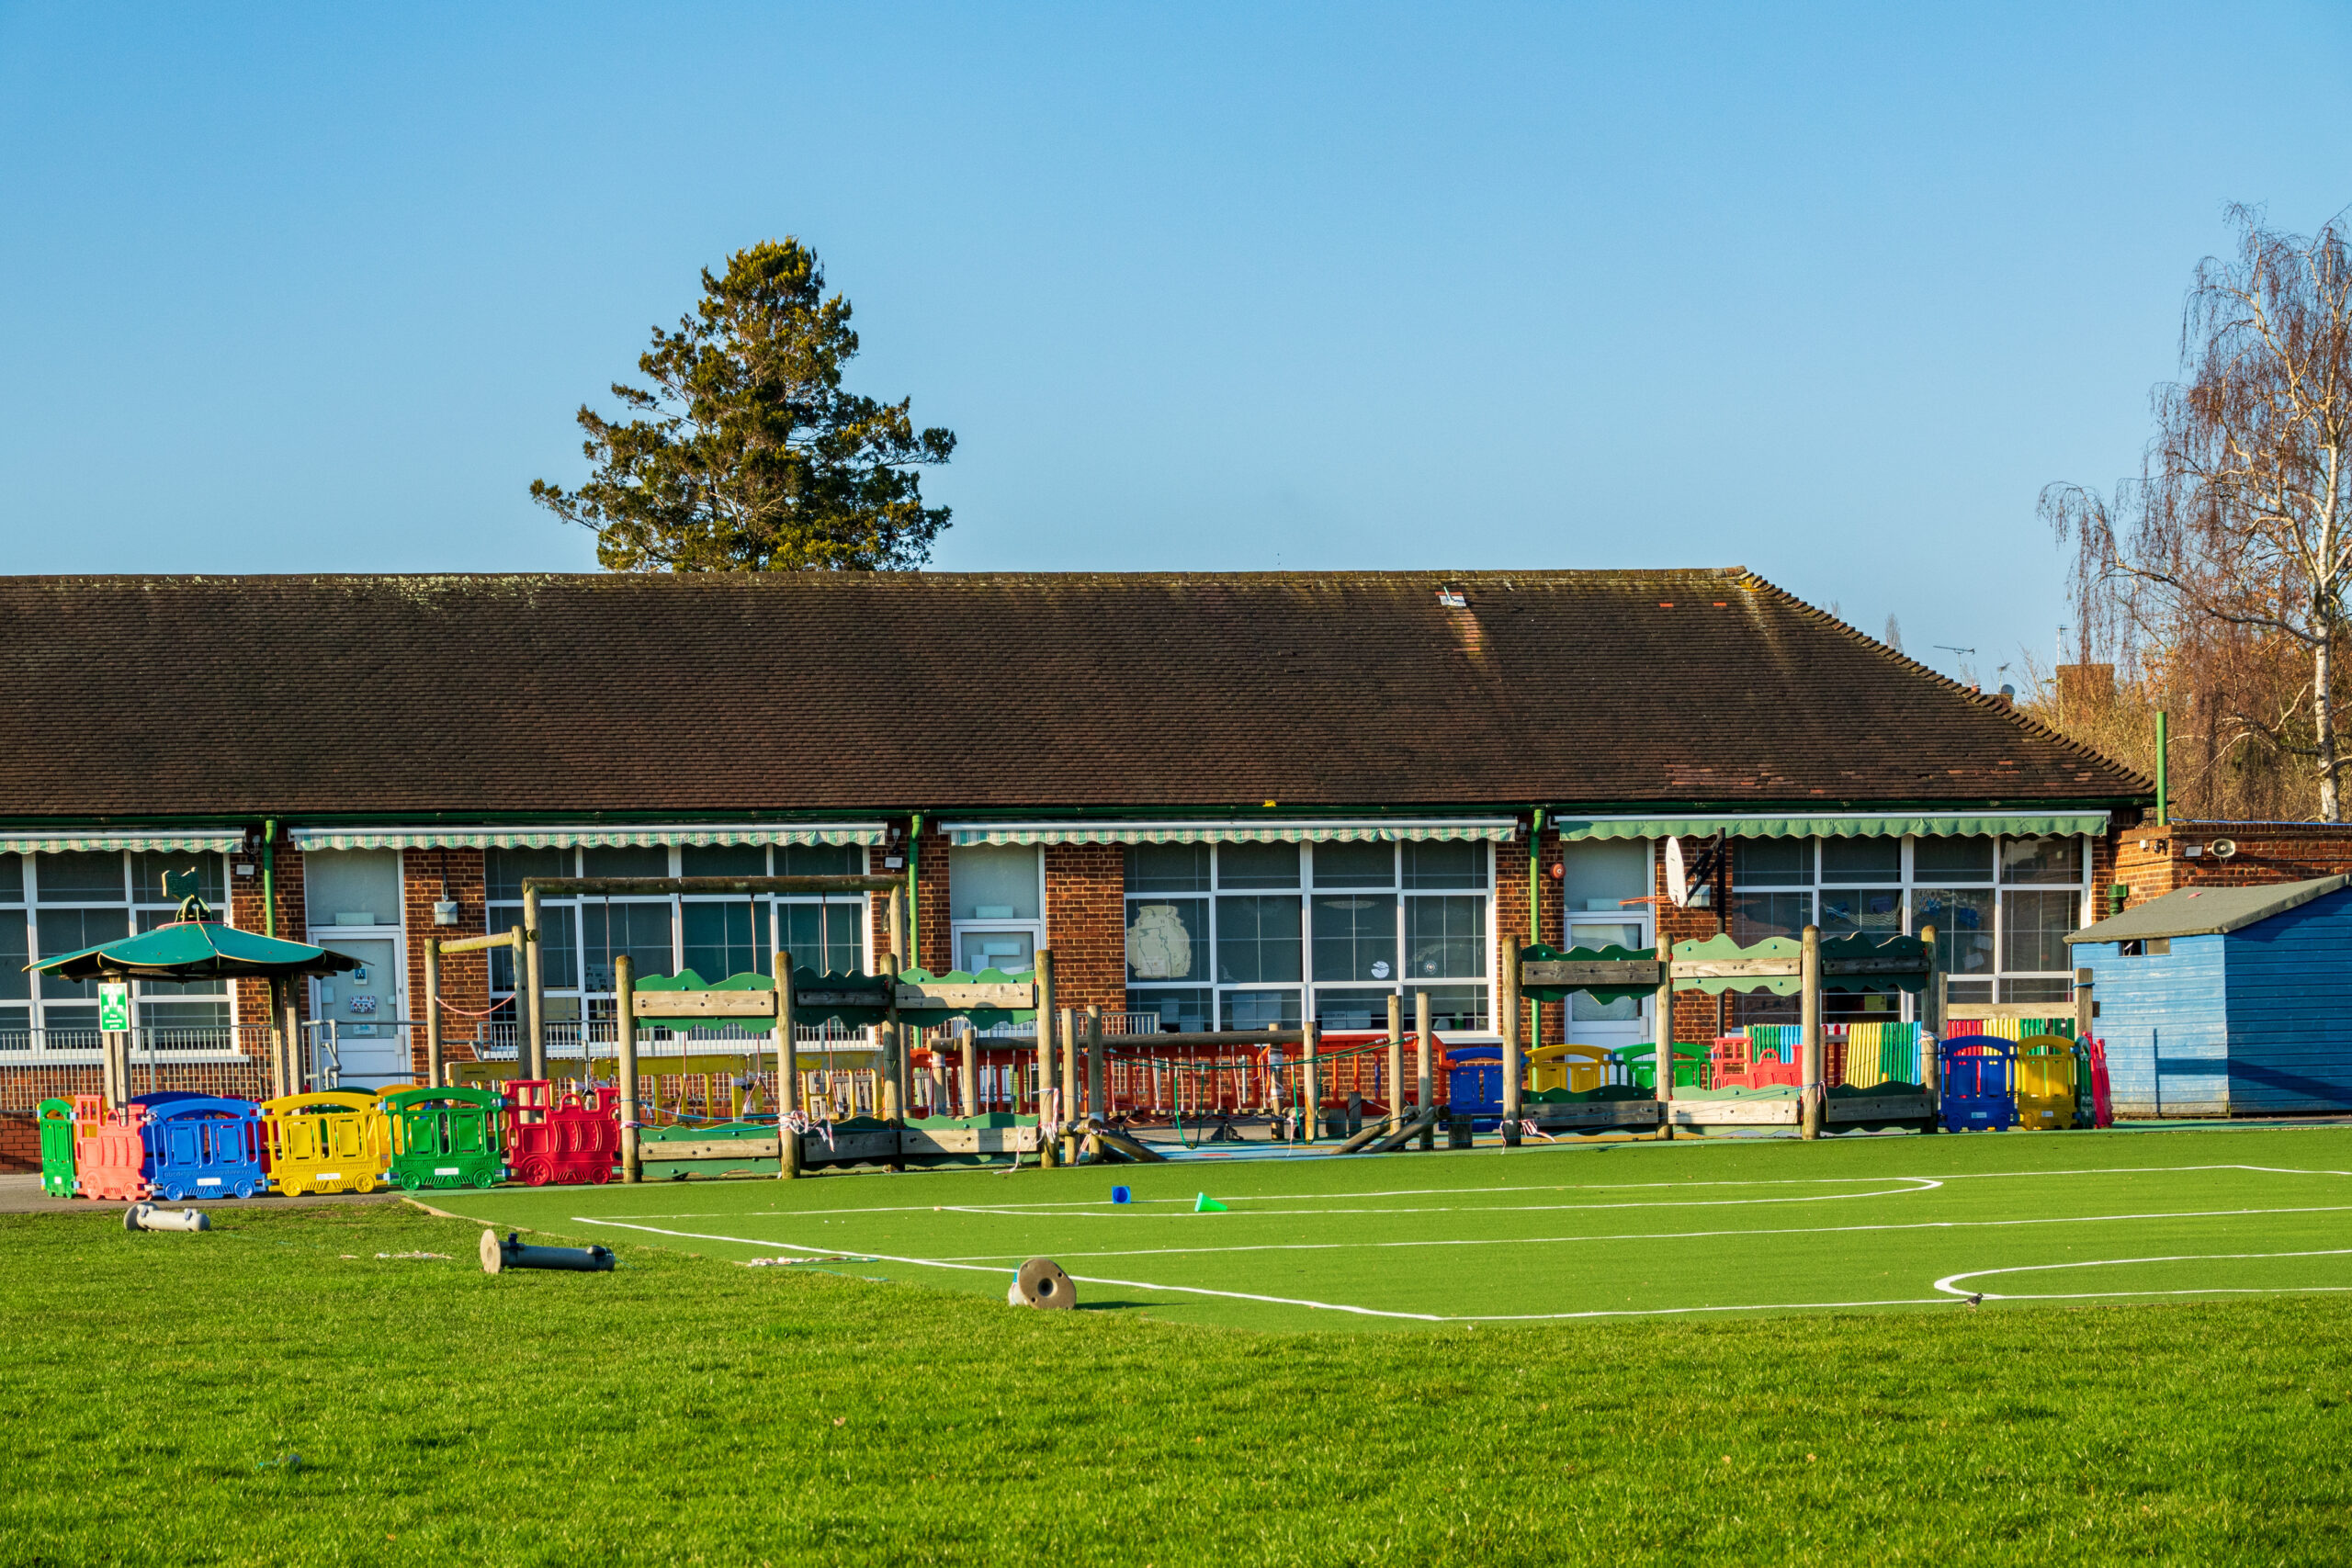 A British Junior school playground outside an infant school with a small football field and various outdoor toys and climbing amenities.